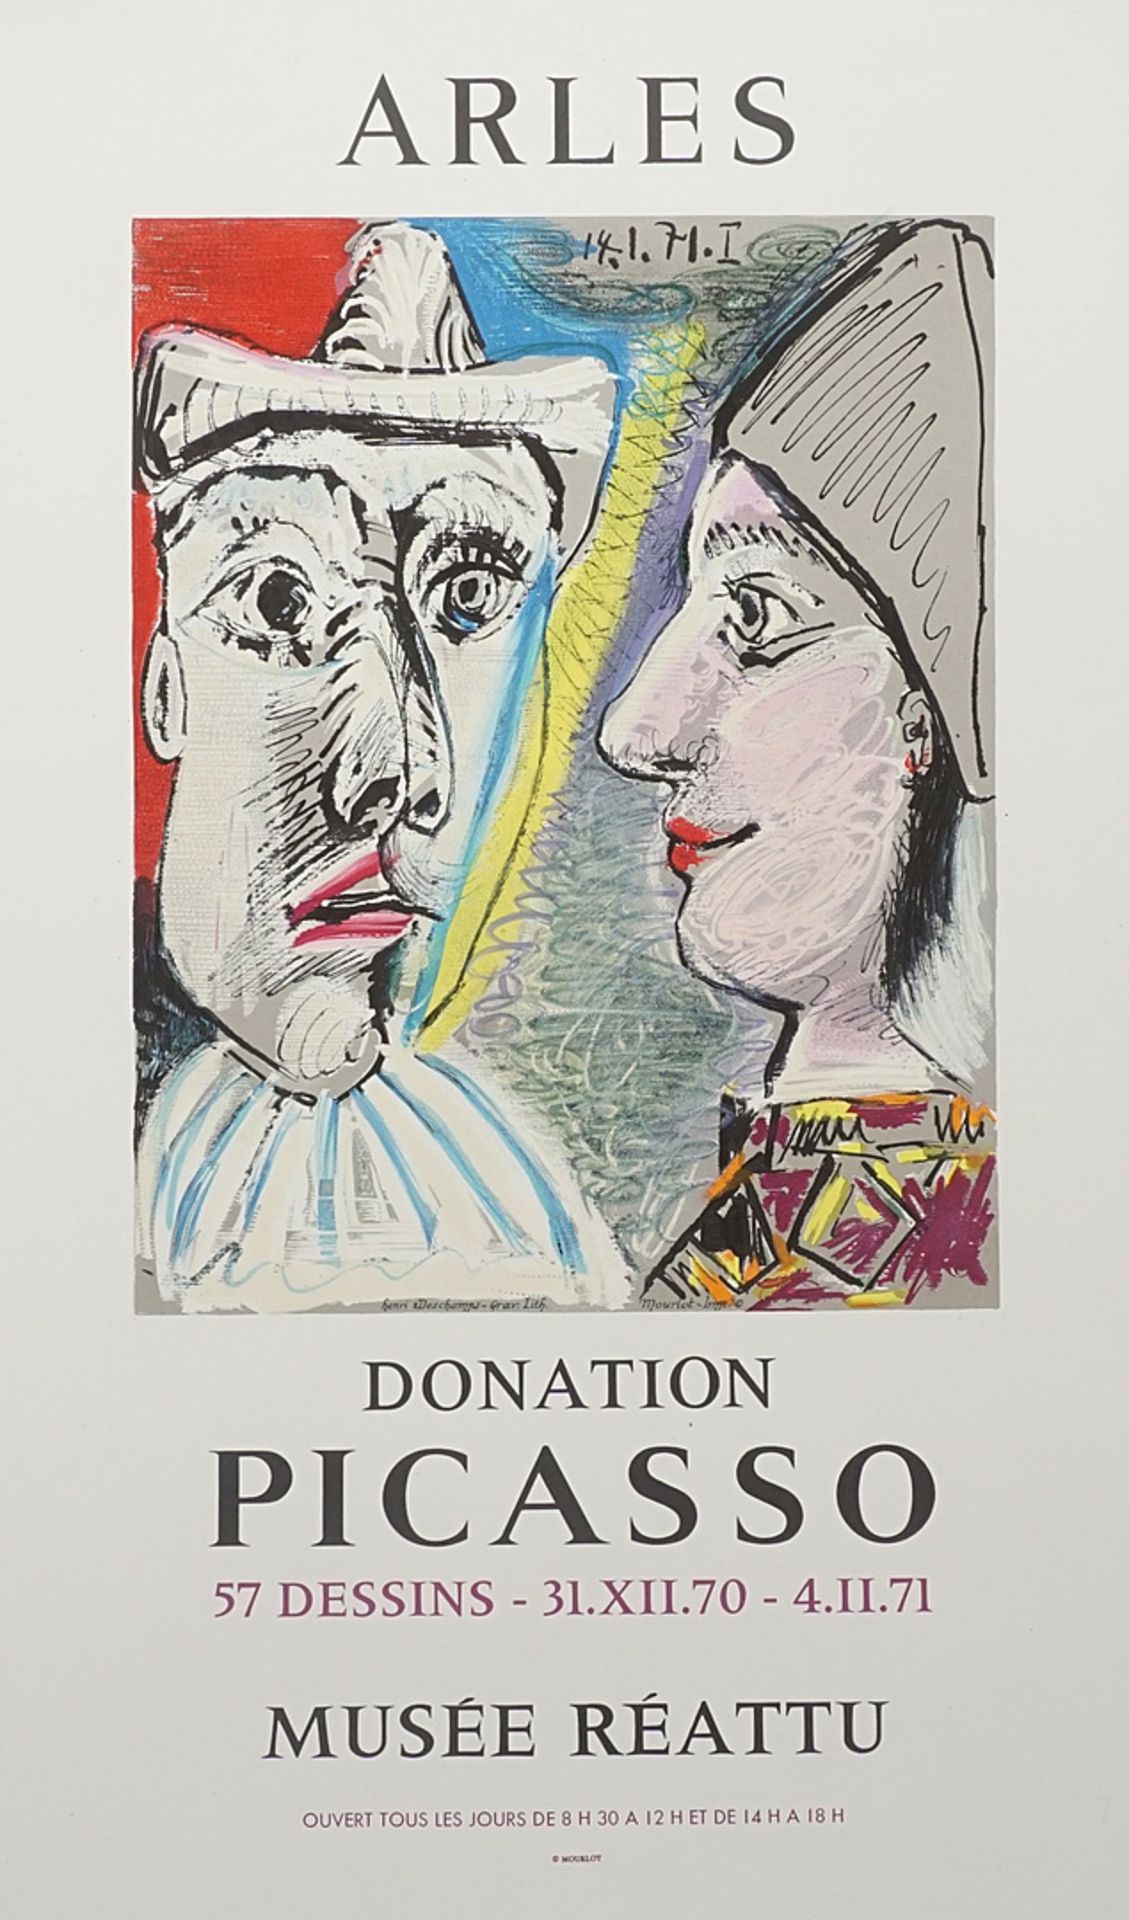 Pablo Picasso (1881-1973), Poster for the exhibition at the Musée Réattu, Arles, 1970/71